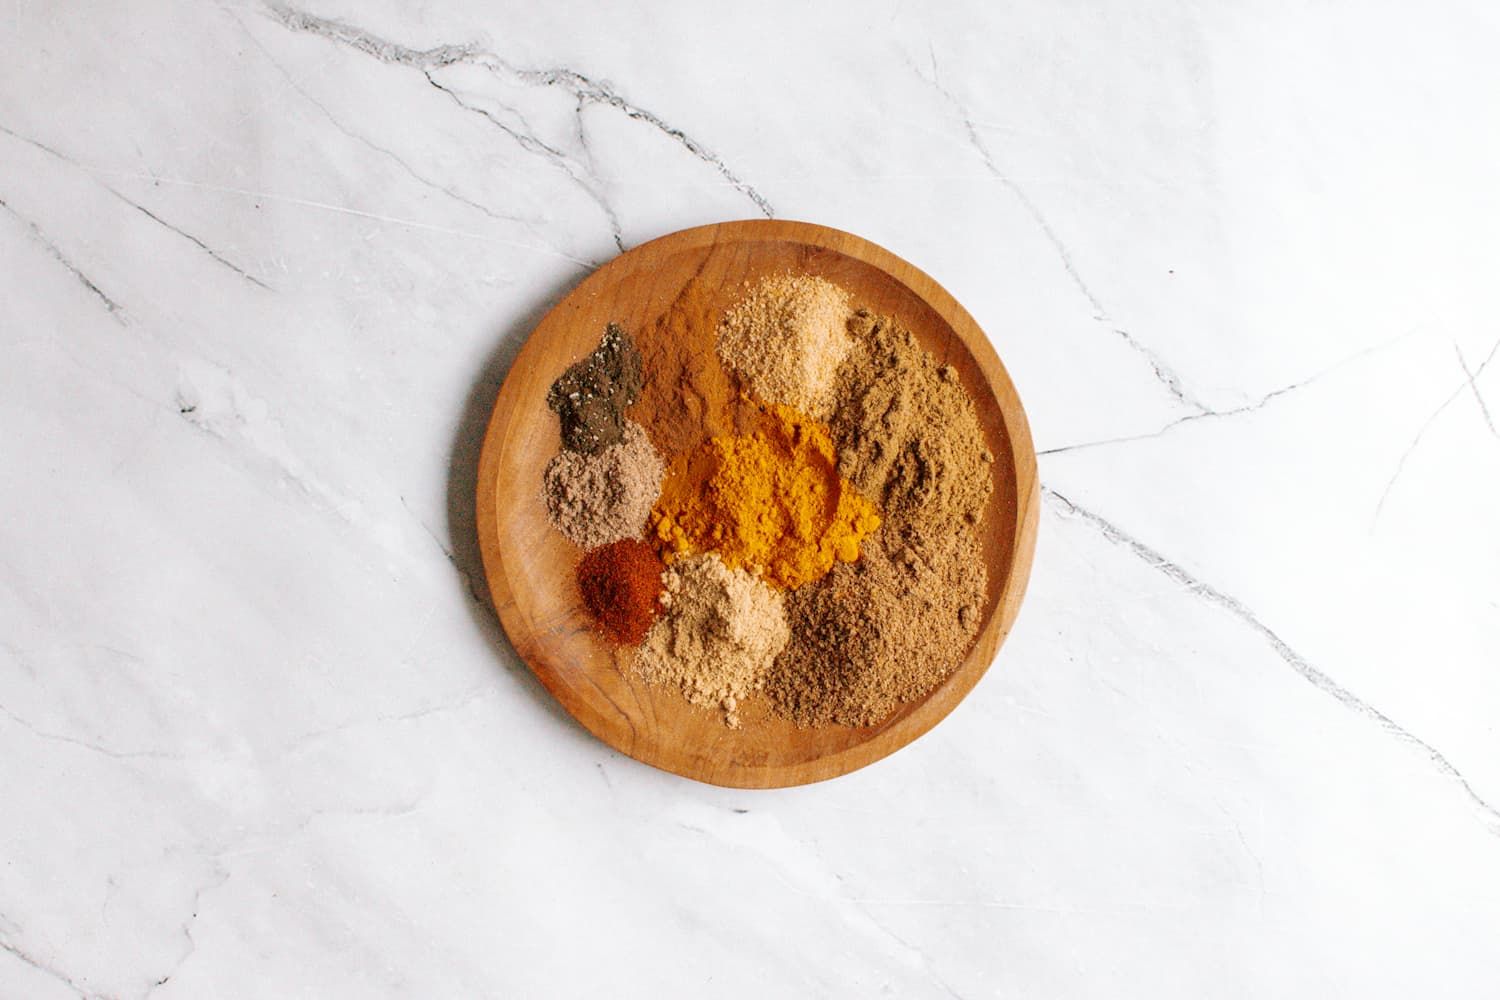 Homemade curry powder on a wooden plate with a variety of ground spices including cumin, coriander, cardamom, ginger, cinnamon, and cayenne.